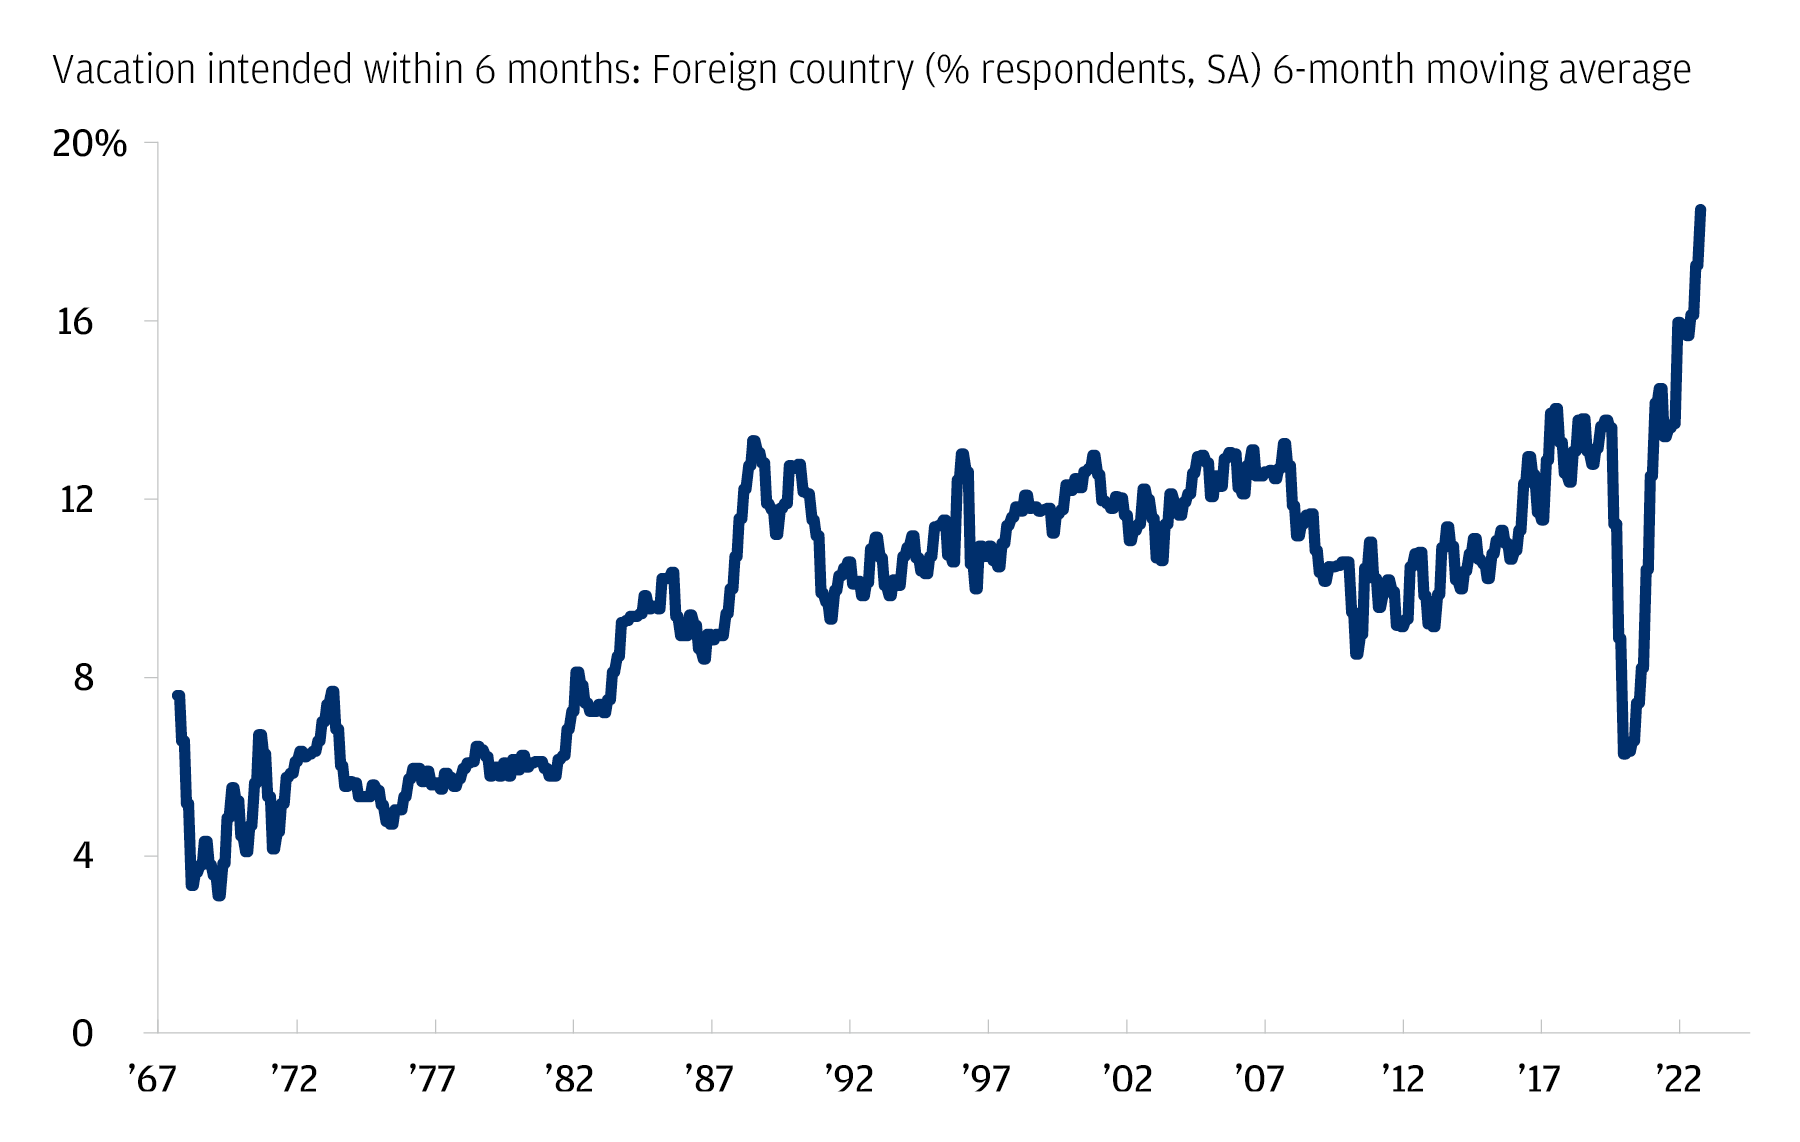 This chart describes the 6-month moving average of the % of respondents that, within 6 months, intended vacation to a foreign country.